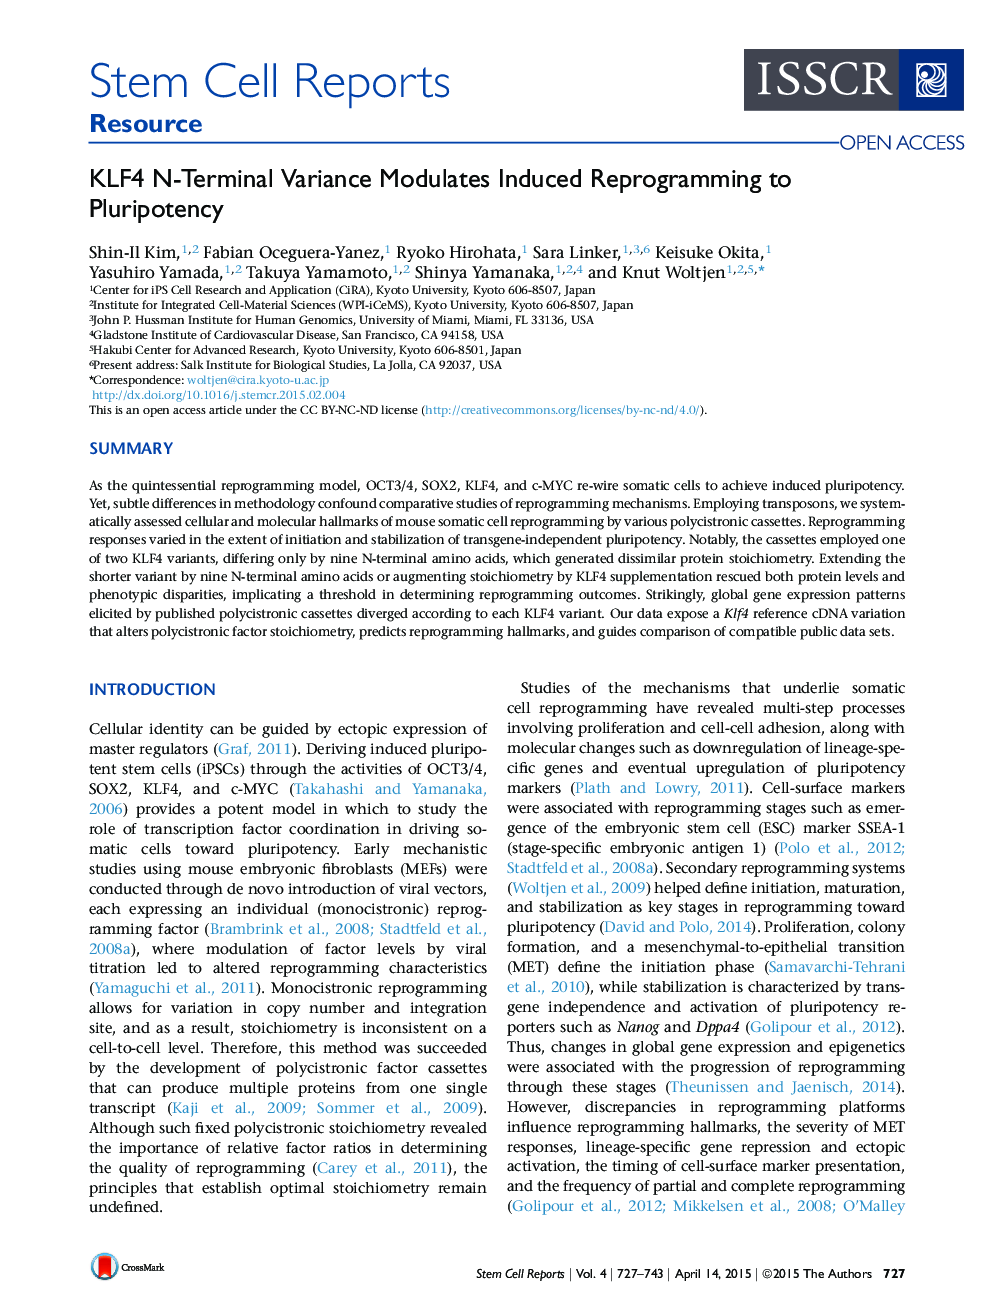 KLF4 N-Terminal Variance Modulates Induced Reprogramming to Pluripotency 